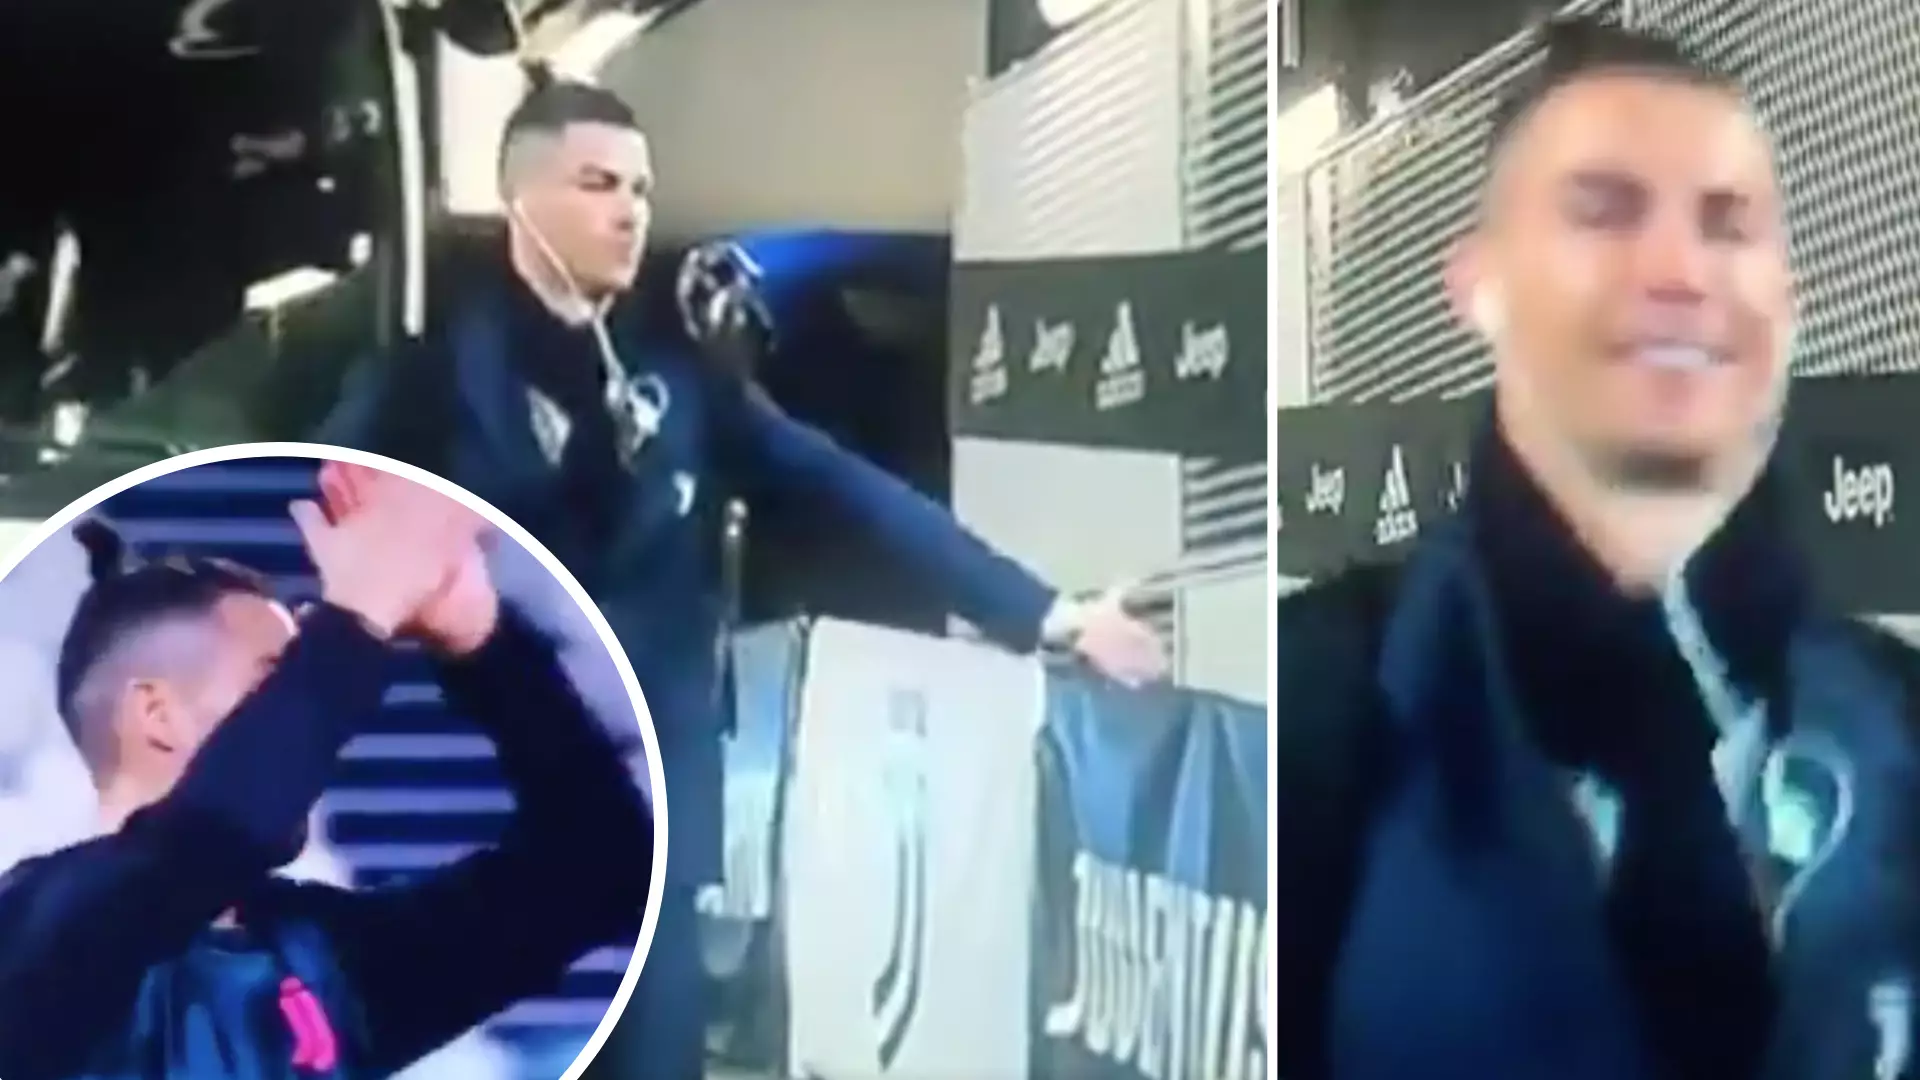 Cristiano Ronaldo High Fives Non-Existent Fans And Applauds In Empty Stadium After Juventus Win